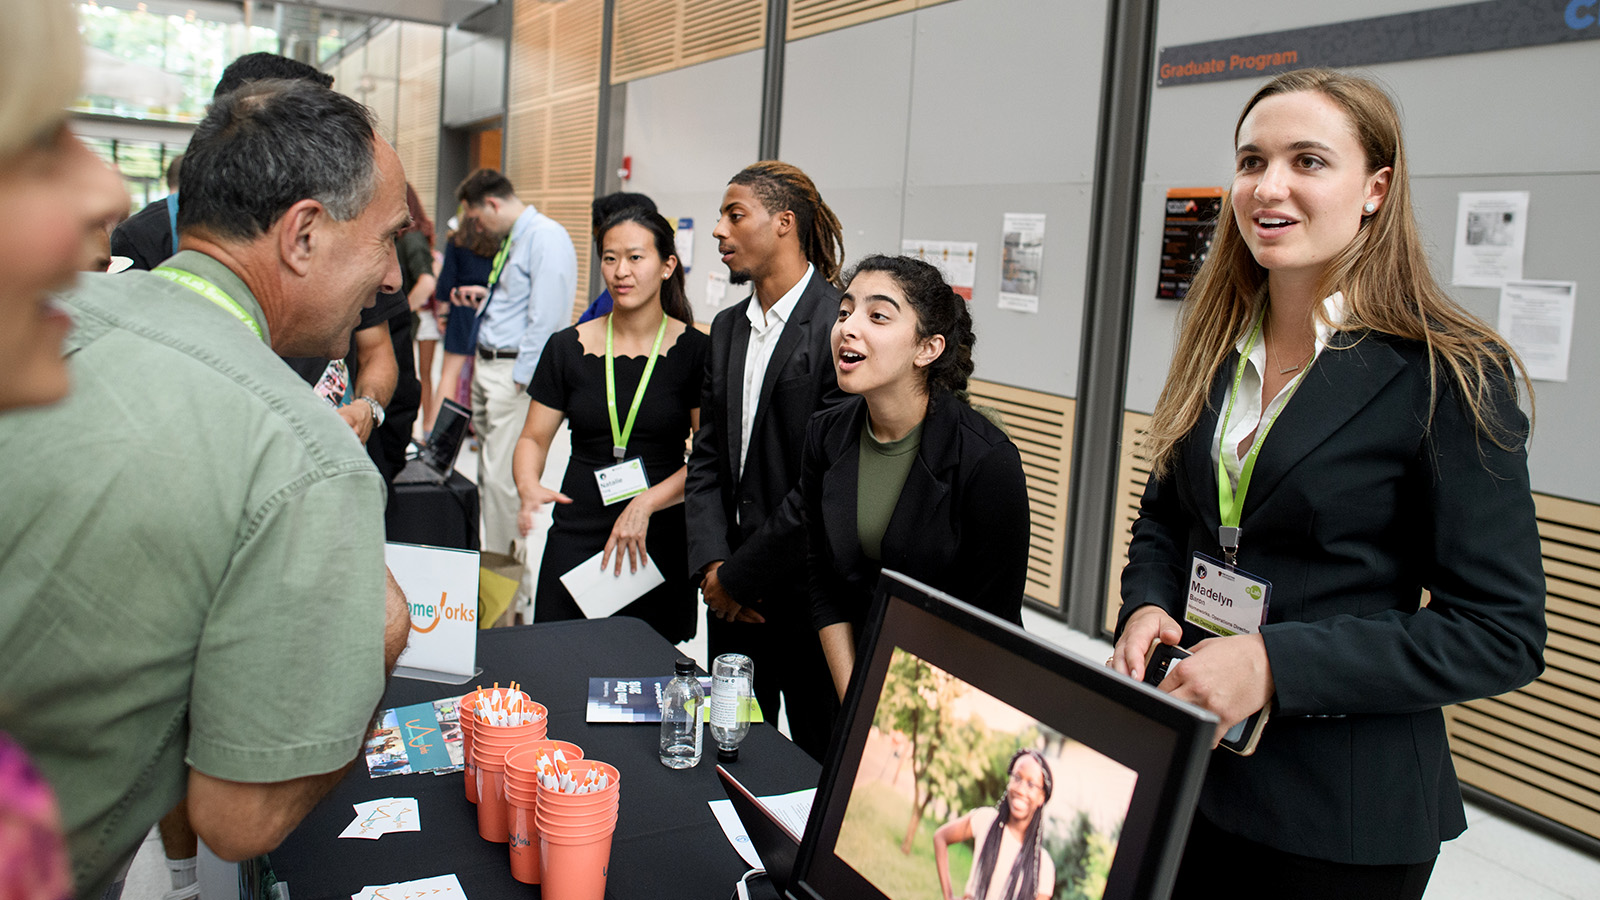 Student entrepreneurs speak with participants in Demo Day event